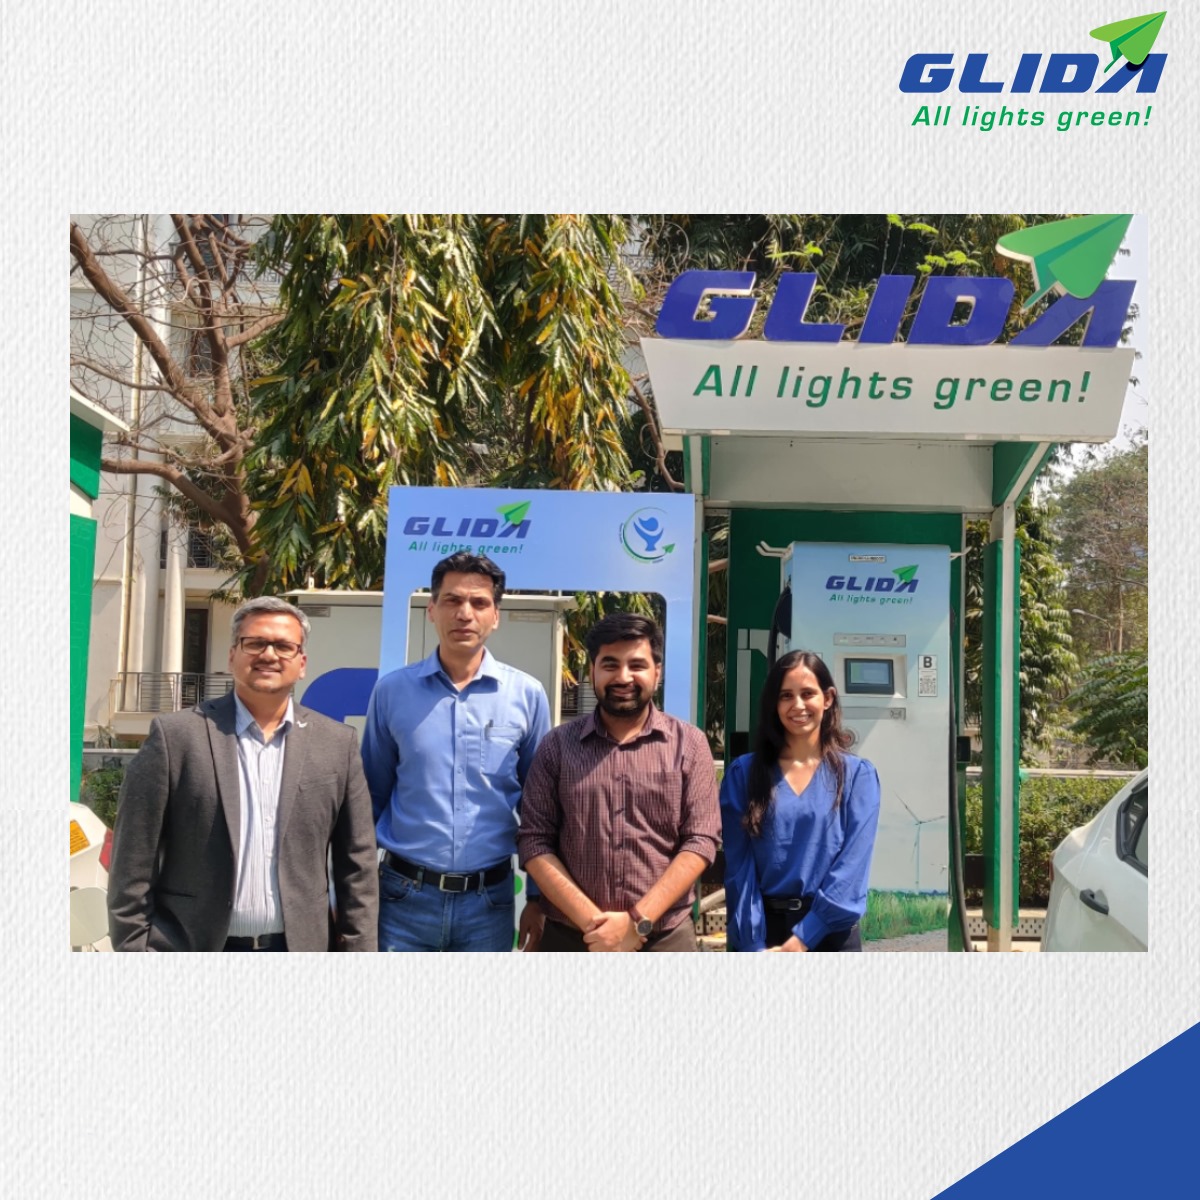 #AllLightsGreen for #GLIDA's strategic partnership with #Statiq aimed at revolutionizing EV charging in India💚
Seamless interoperability with our 700+ #chargingstations accessible via Statiq App along with GLIDA App & Charge-Thru - an innovative app-agnostic weblink solution ⚡️